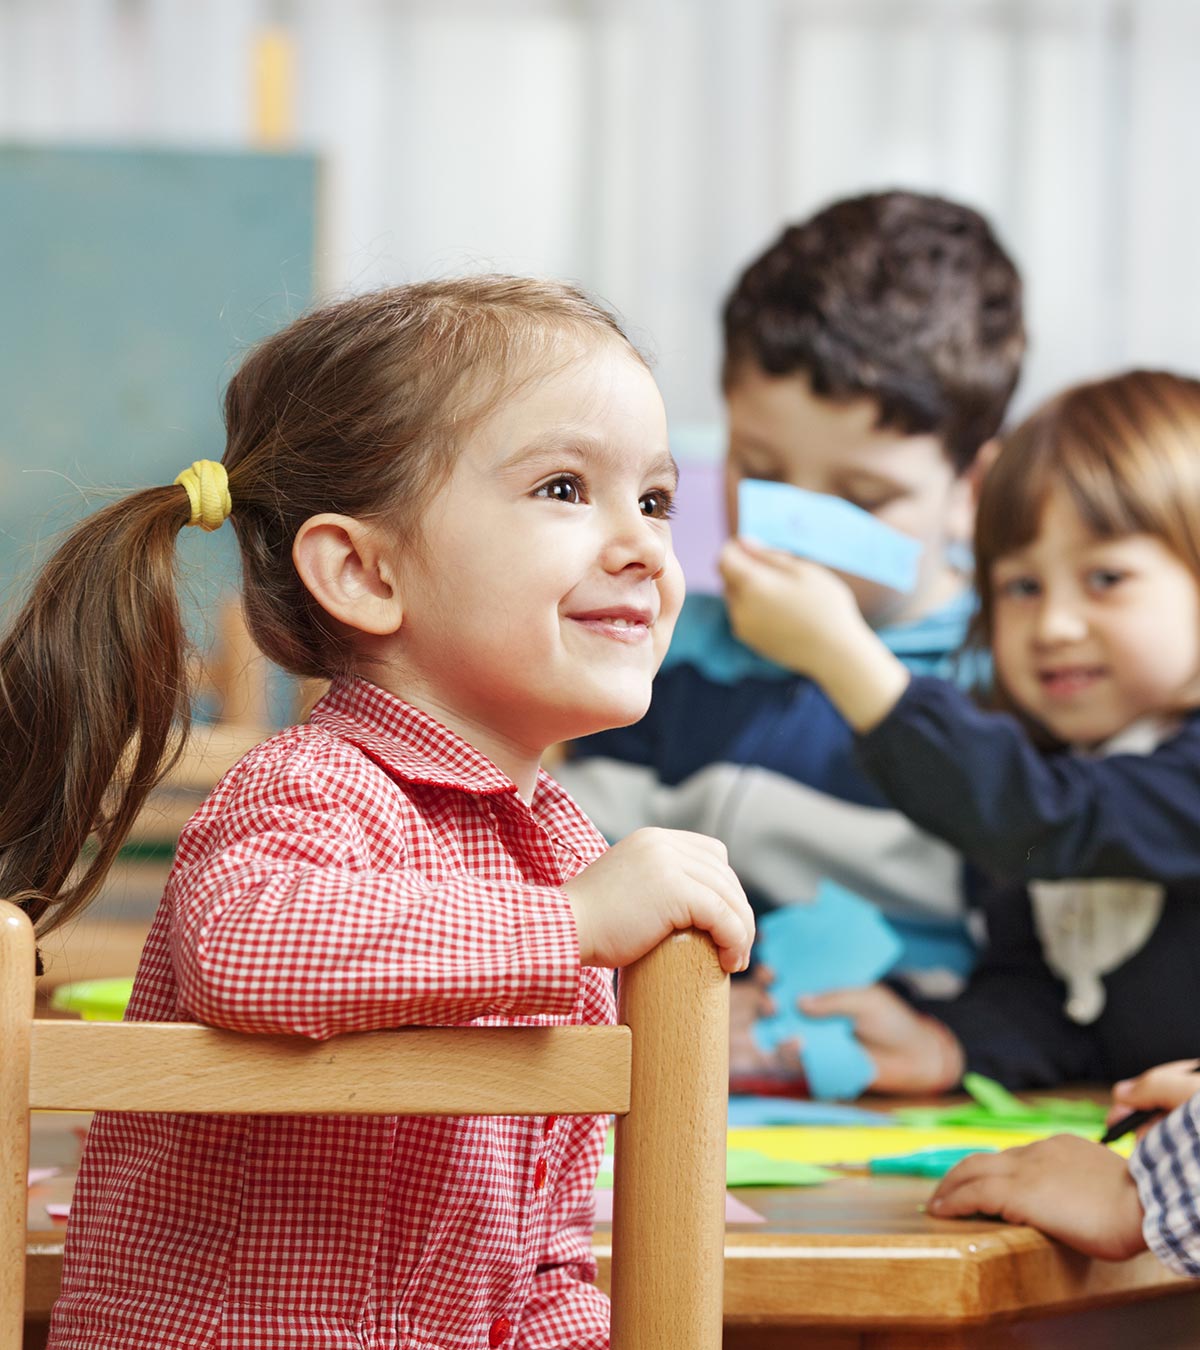 What are the Advantages and disadvantages of sending a child to preschool?